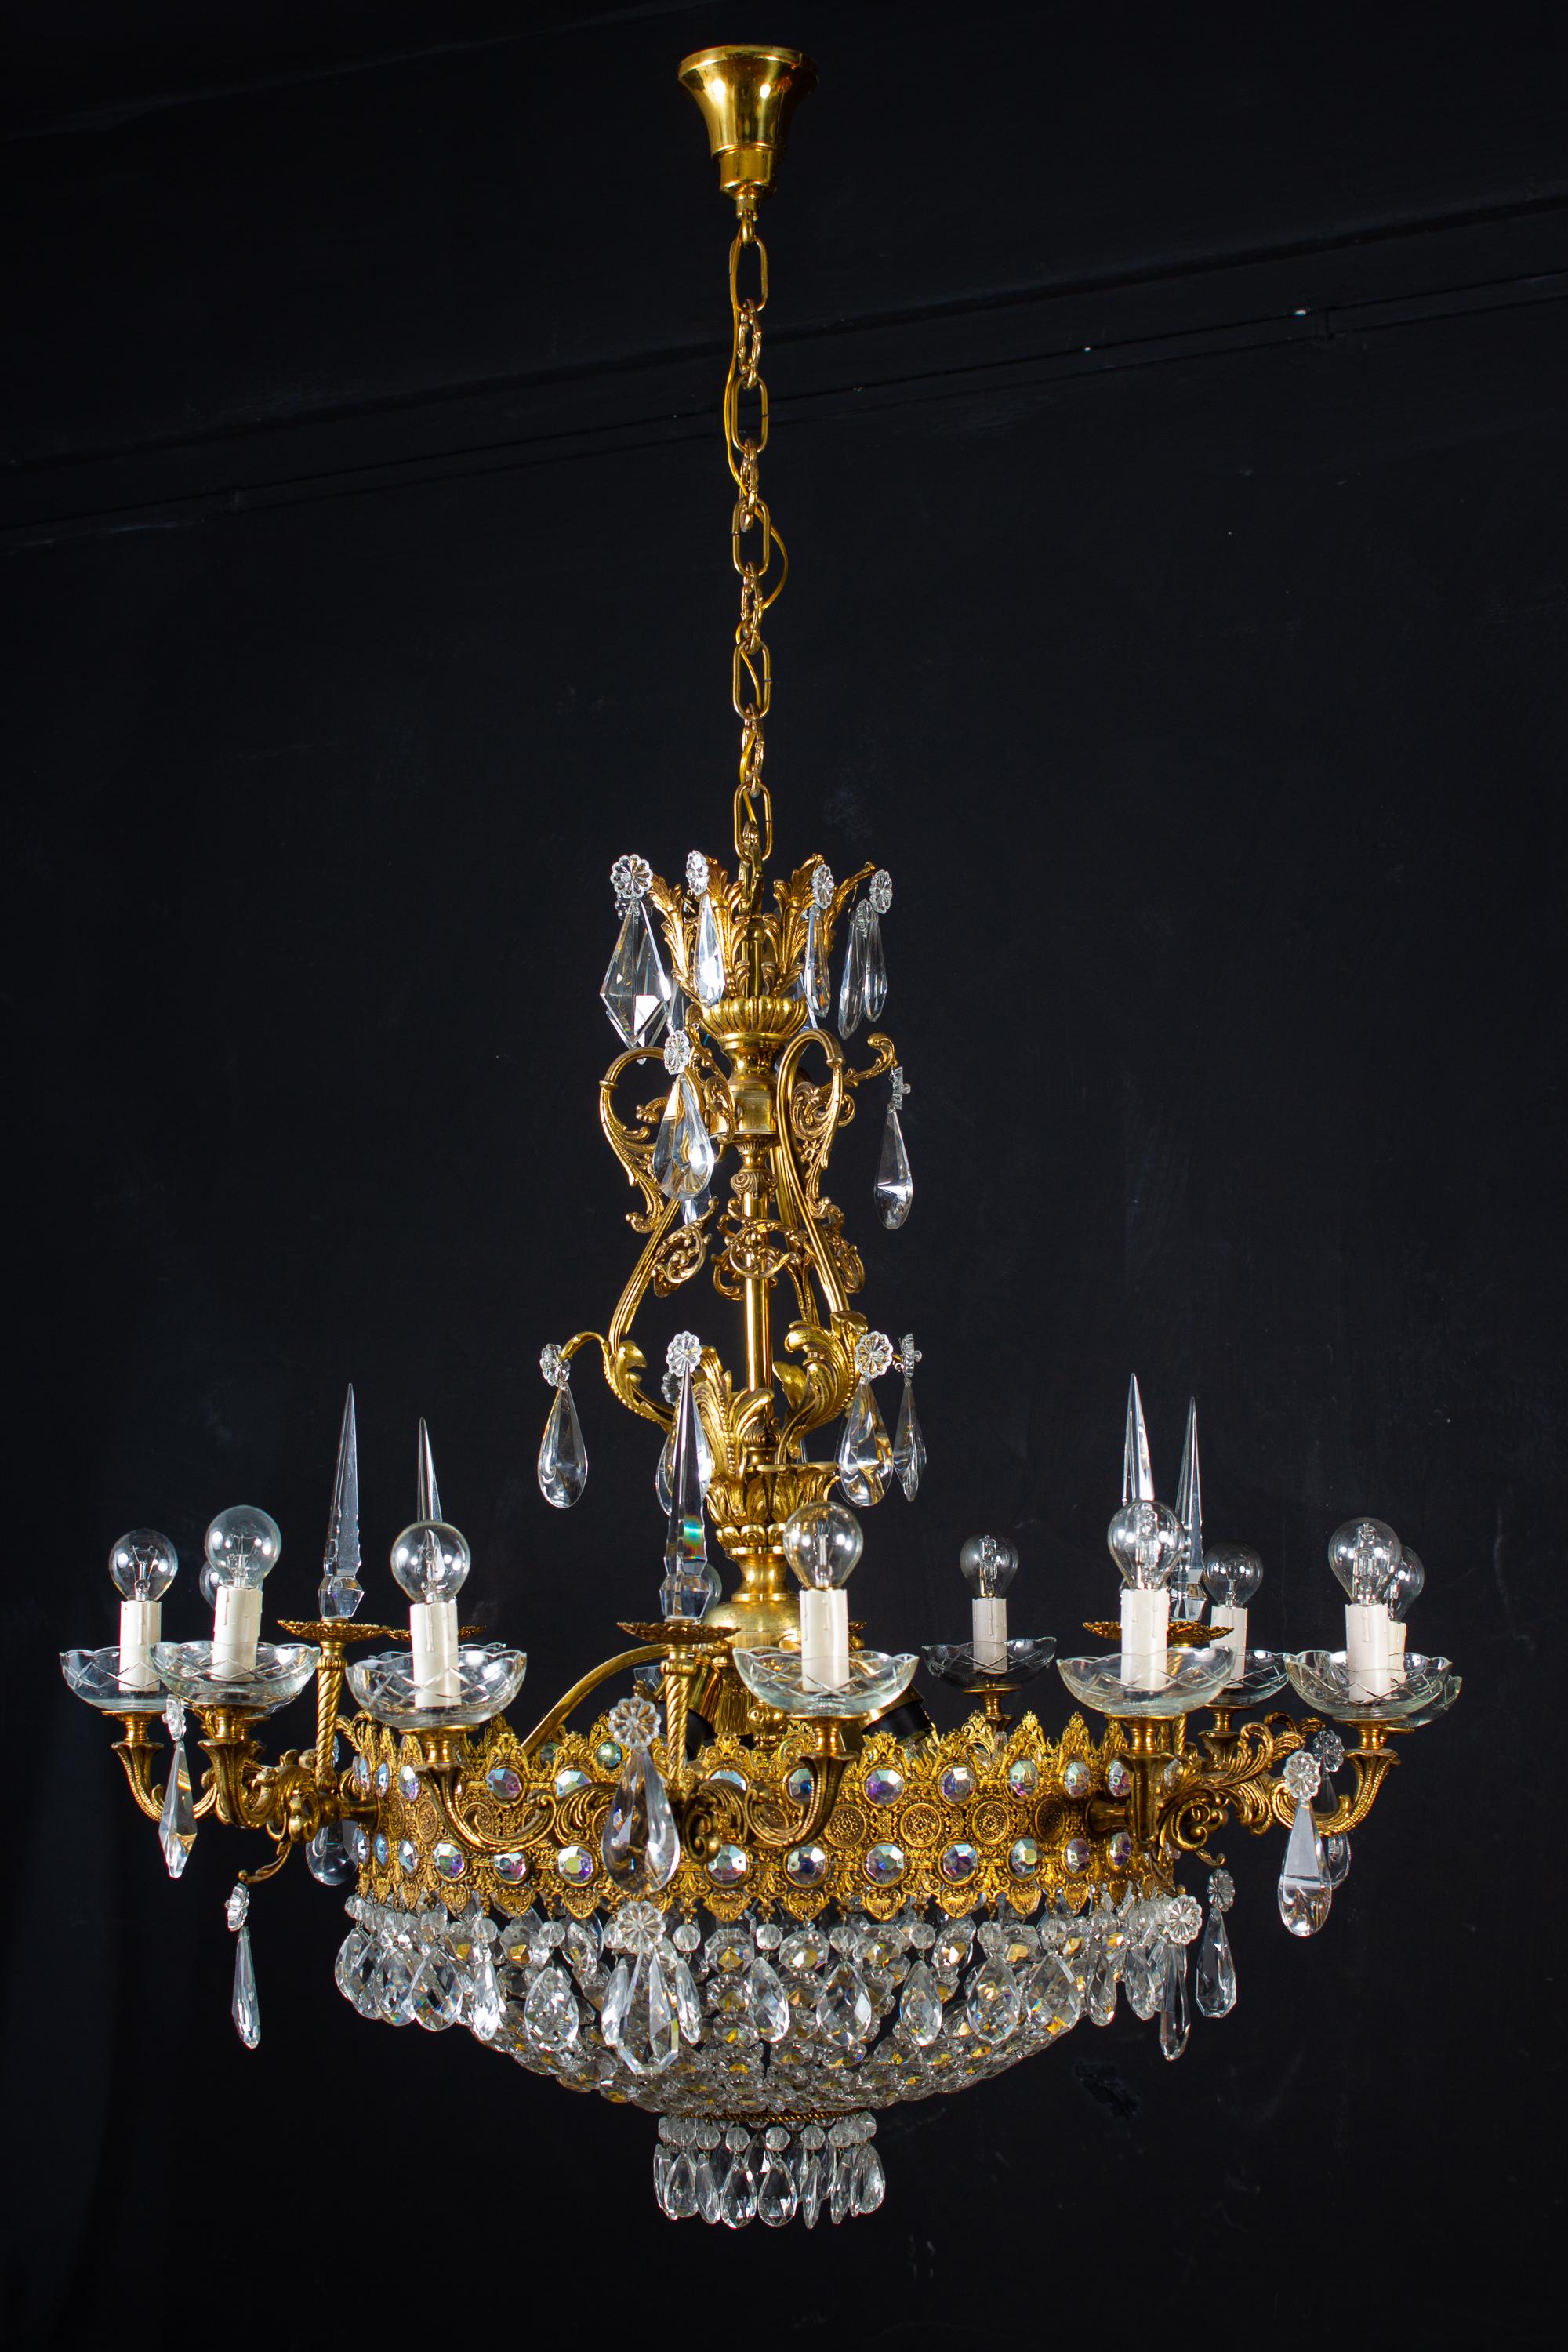 This Sumptuous twelve arms chandelier with a set of precious diamond shape cut crystal and drops on a finely chiseled gilt bronze support, decorated with Acanthus leaves. Matching bronze gilded chain and a ceiling canopy.
Ideal for a large